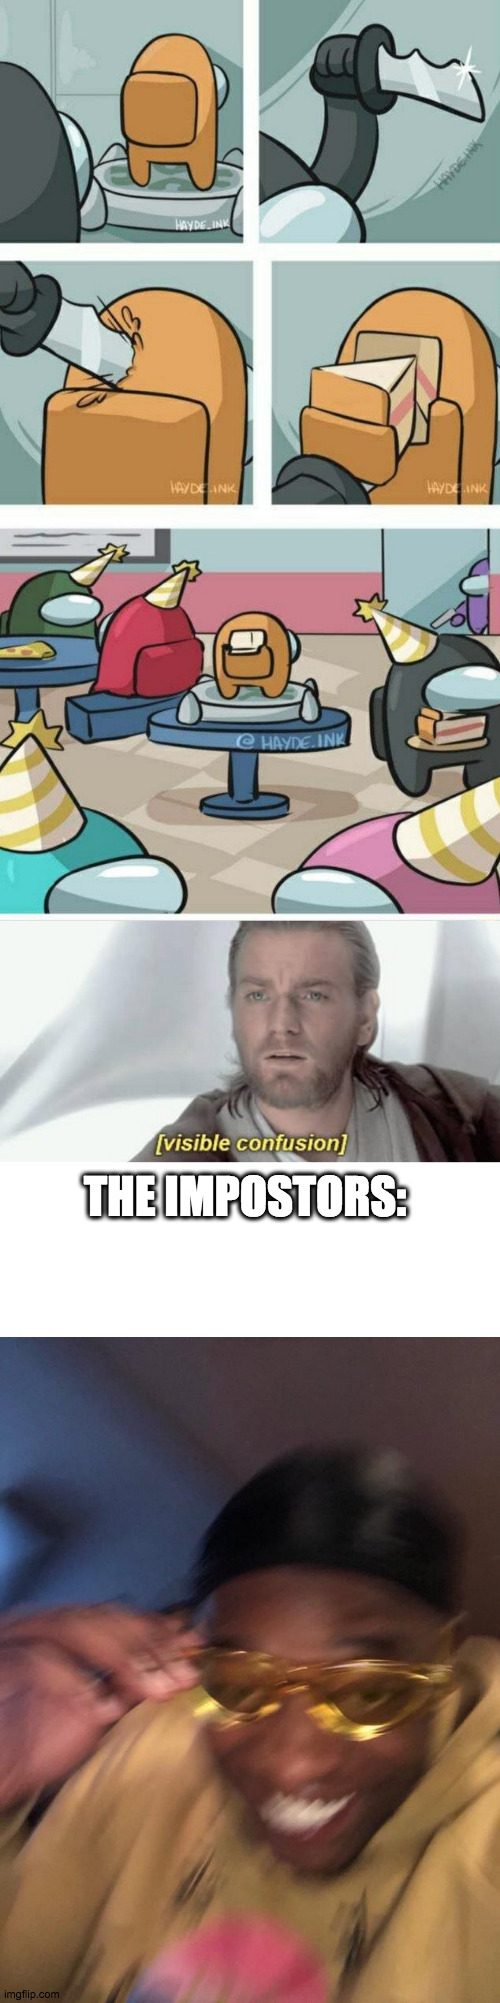 Visible confusion | THE IMPOSTORS: | image tagged in memes,visible confusion | made w/ Imgflip meme maker